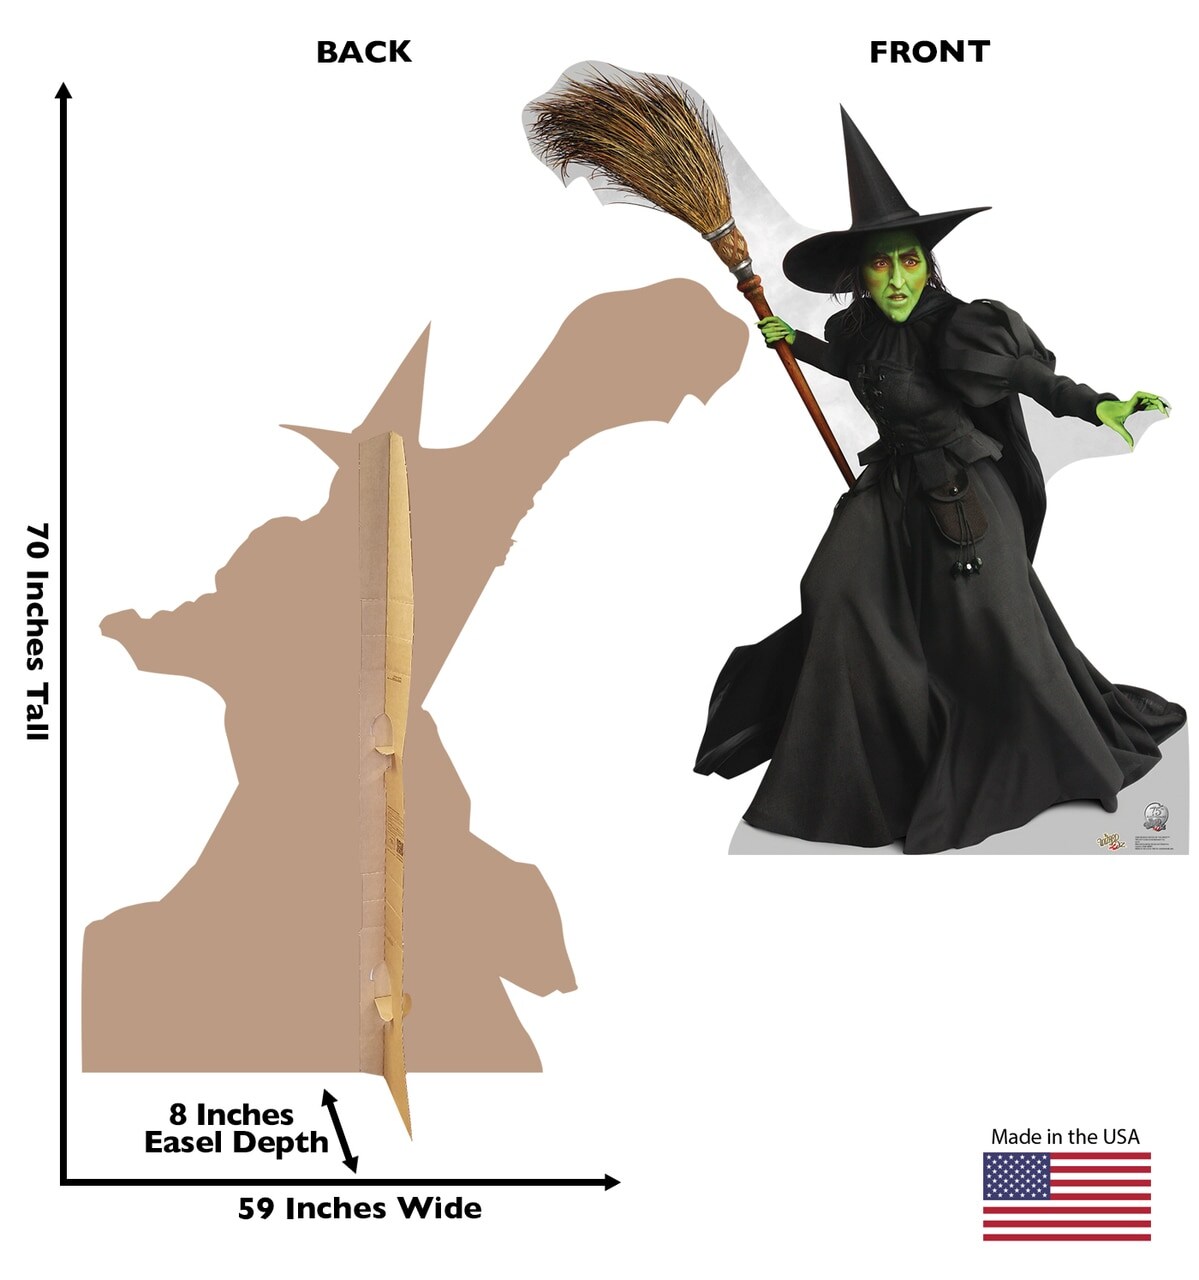 Wicked Witch of the West (Wizard of Oz 75th Anniversary)